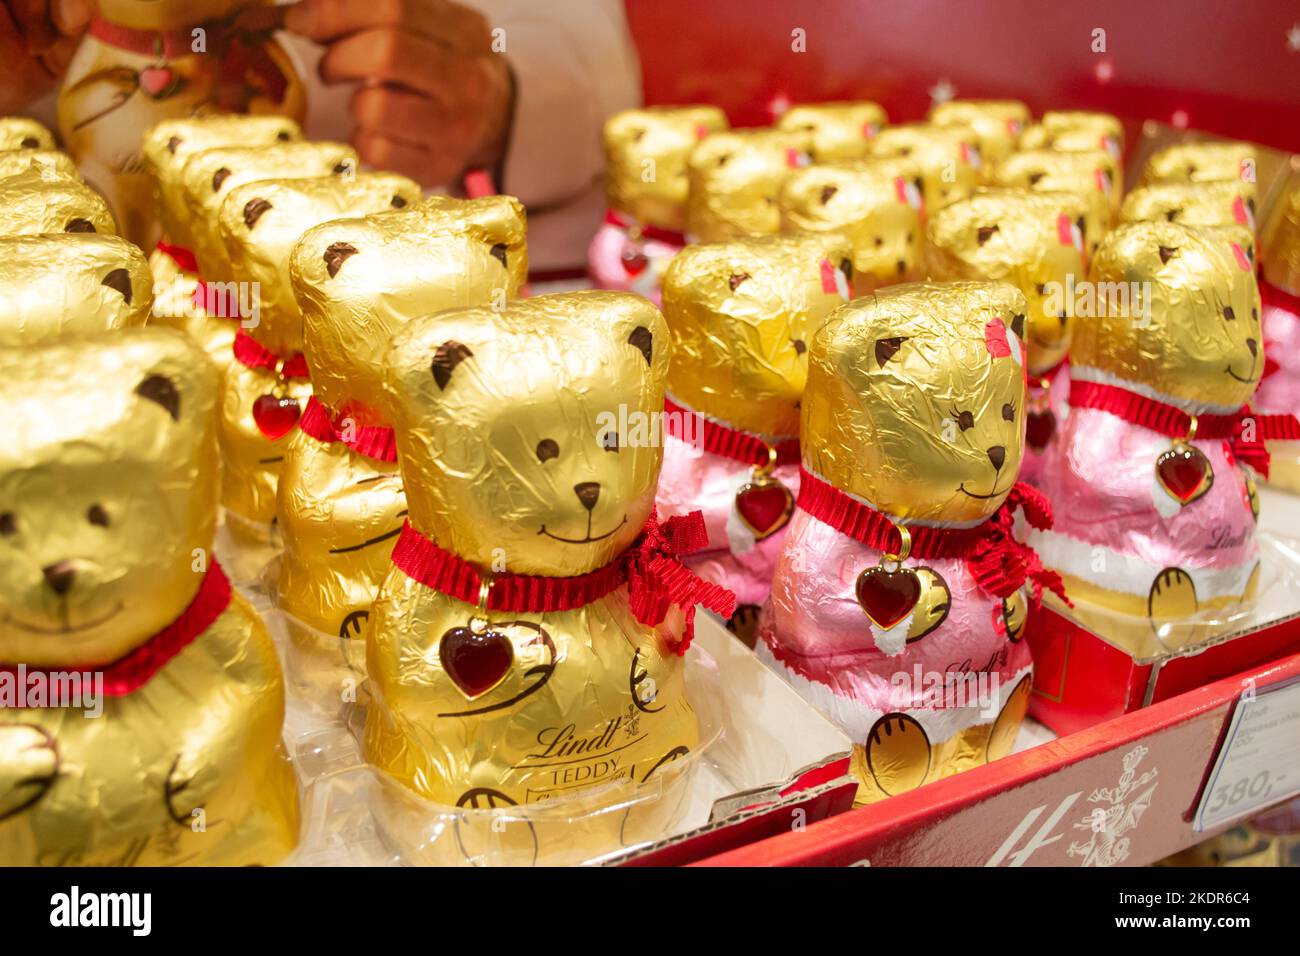 Moscow, Russia, November 2020: Lindt chocolate Teddy bears in gold foil and with a red heart pendant are sold in a supermarket. Stock Photo